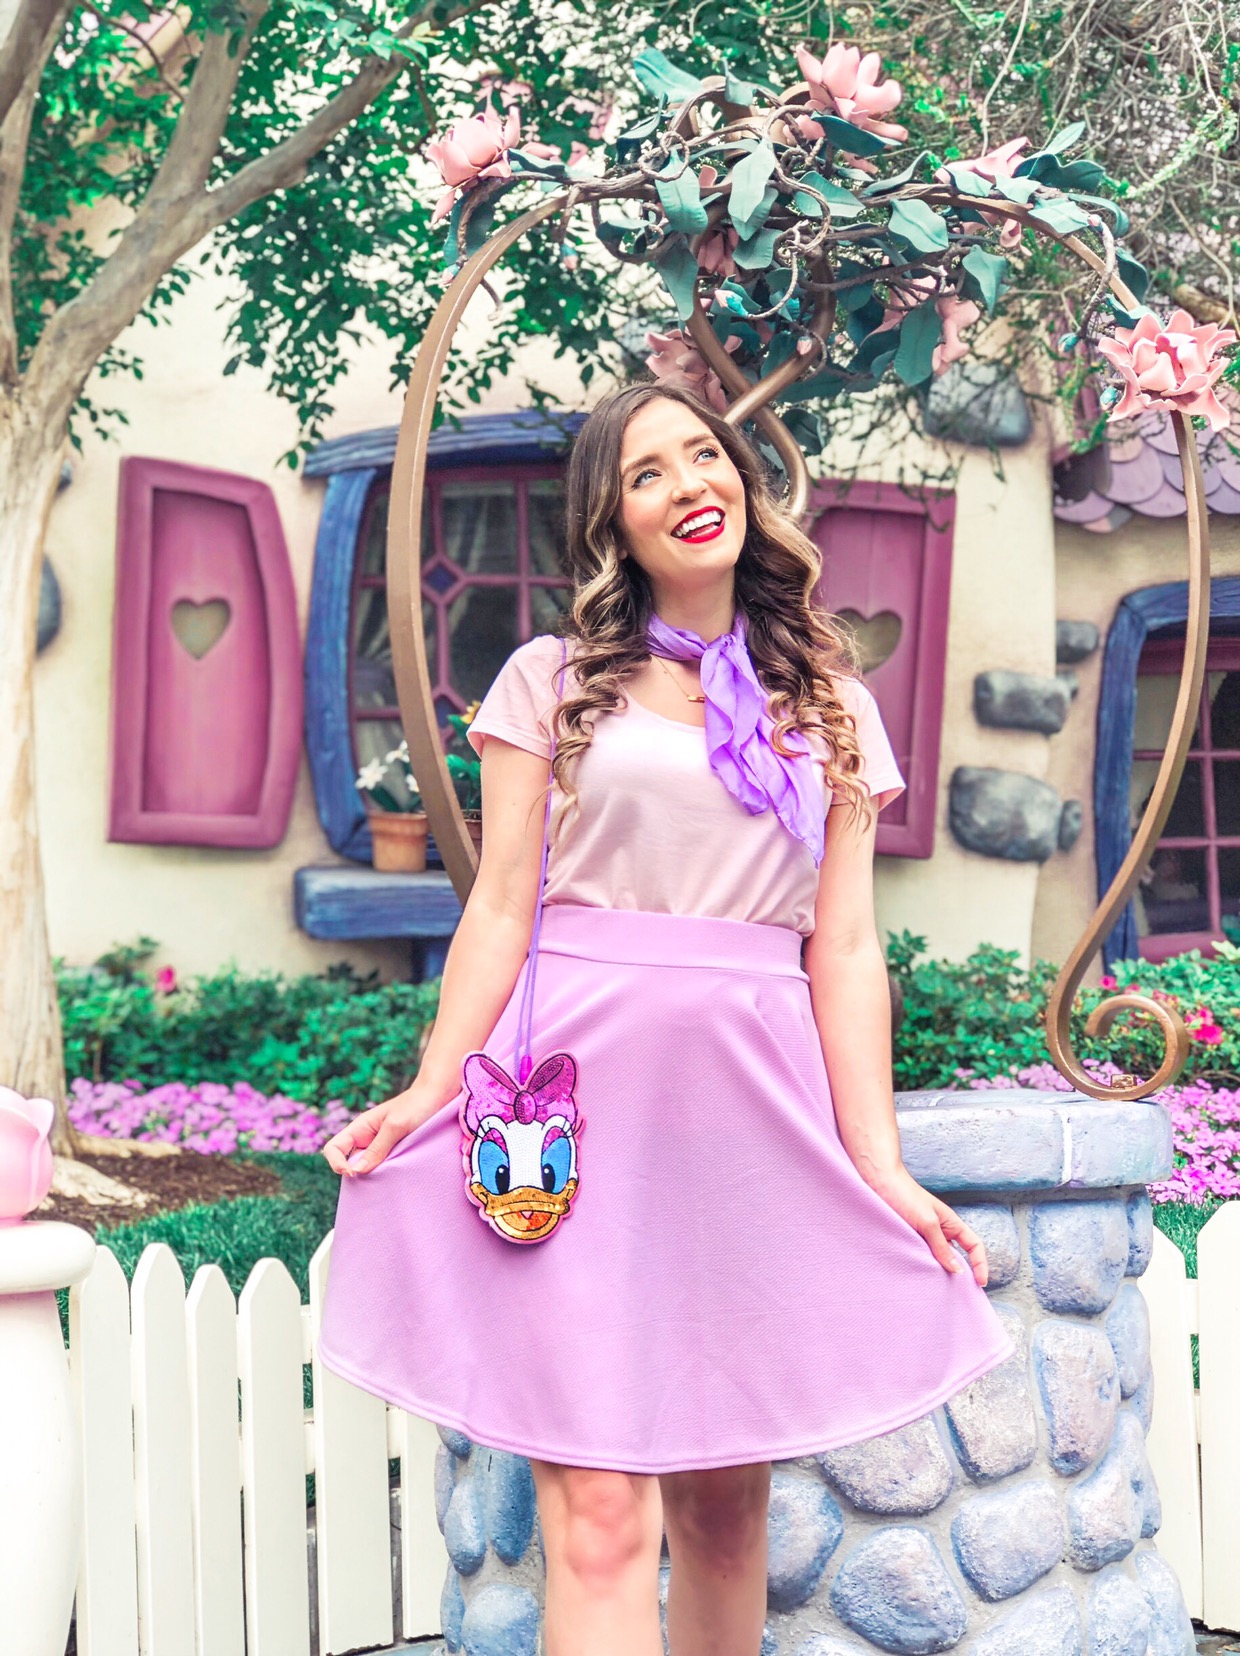 Daisy Duck. 50+ Cutest Disney Inspired Outfit Ideas for Girls - 11